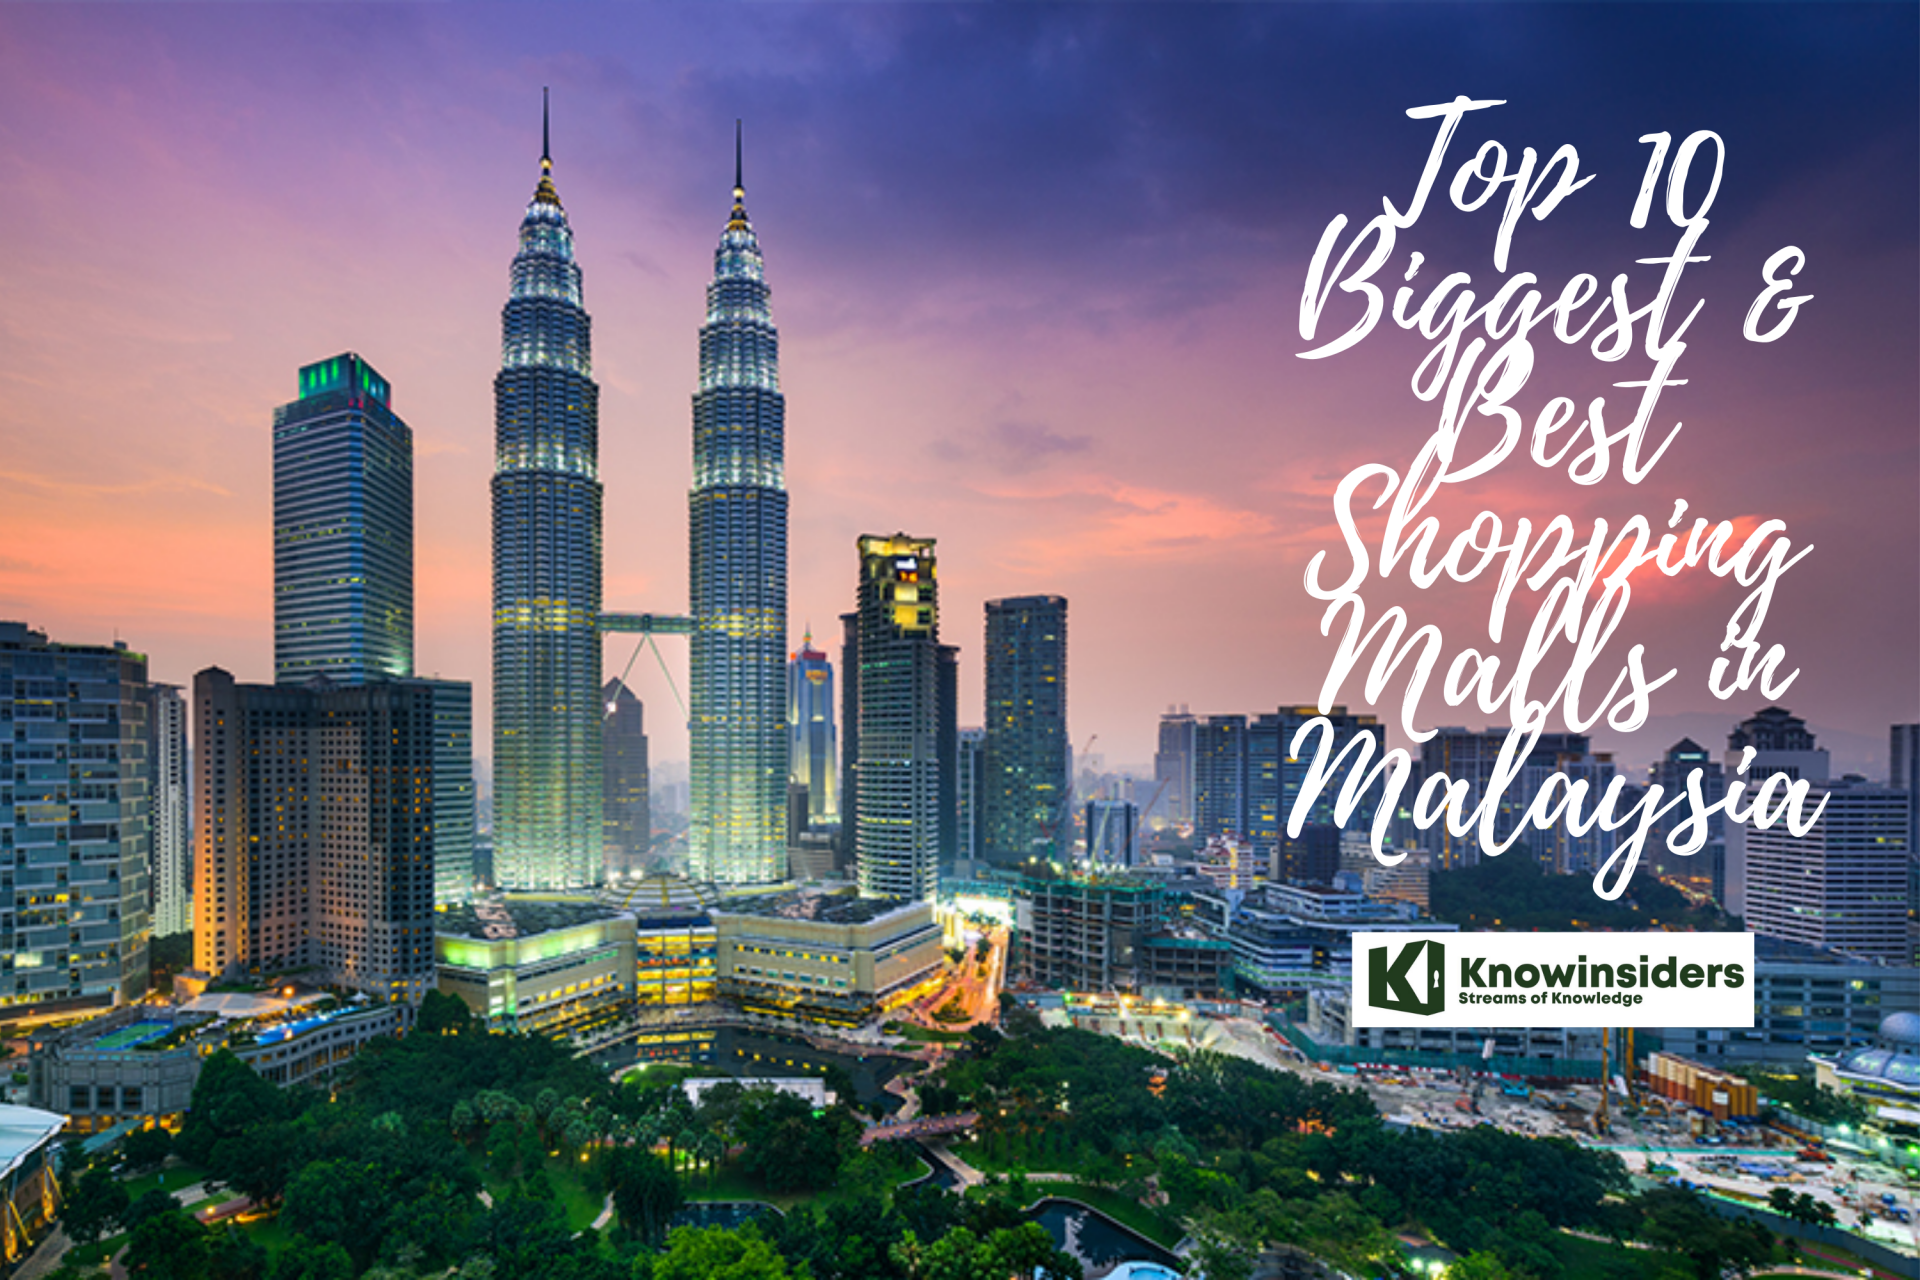 Top 10 Biggest & Best Shopping Malls in Malaysia